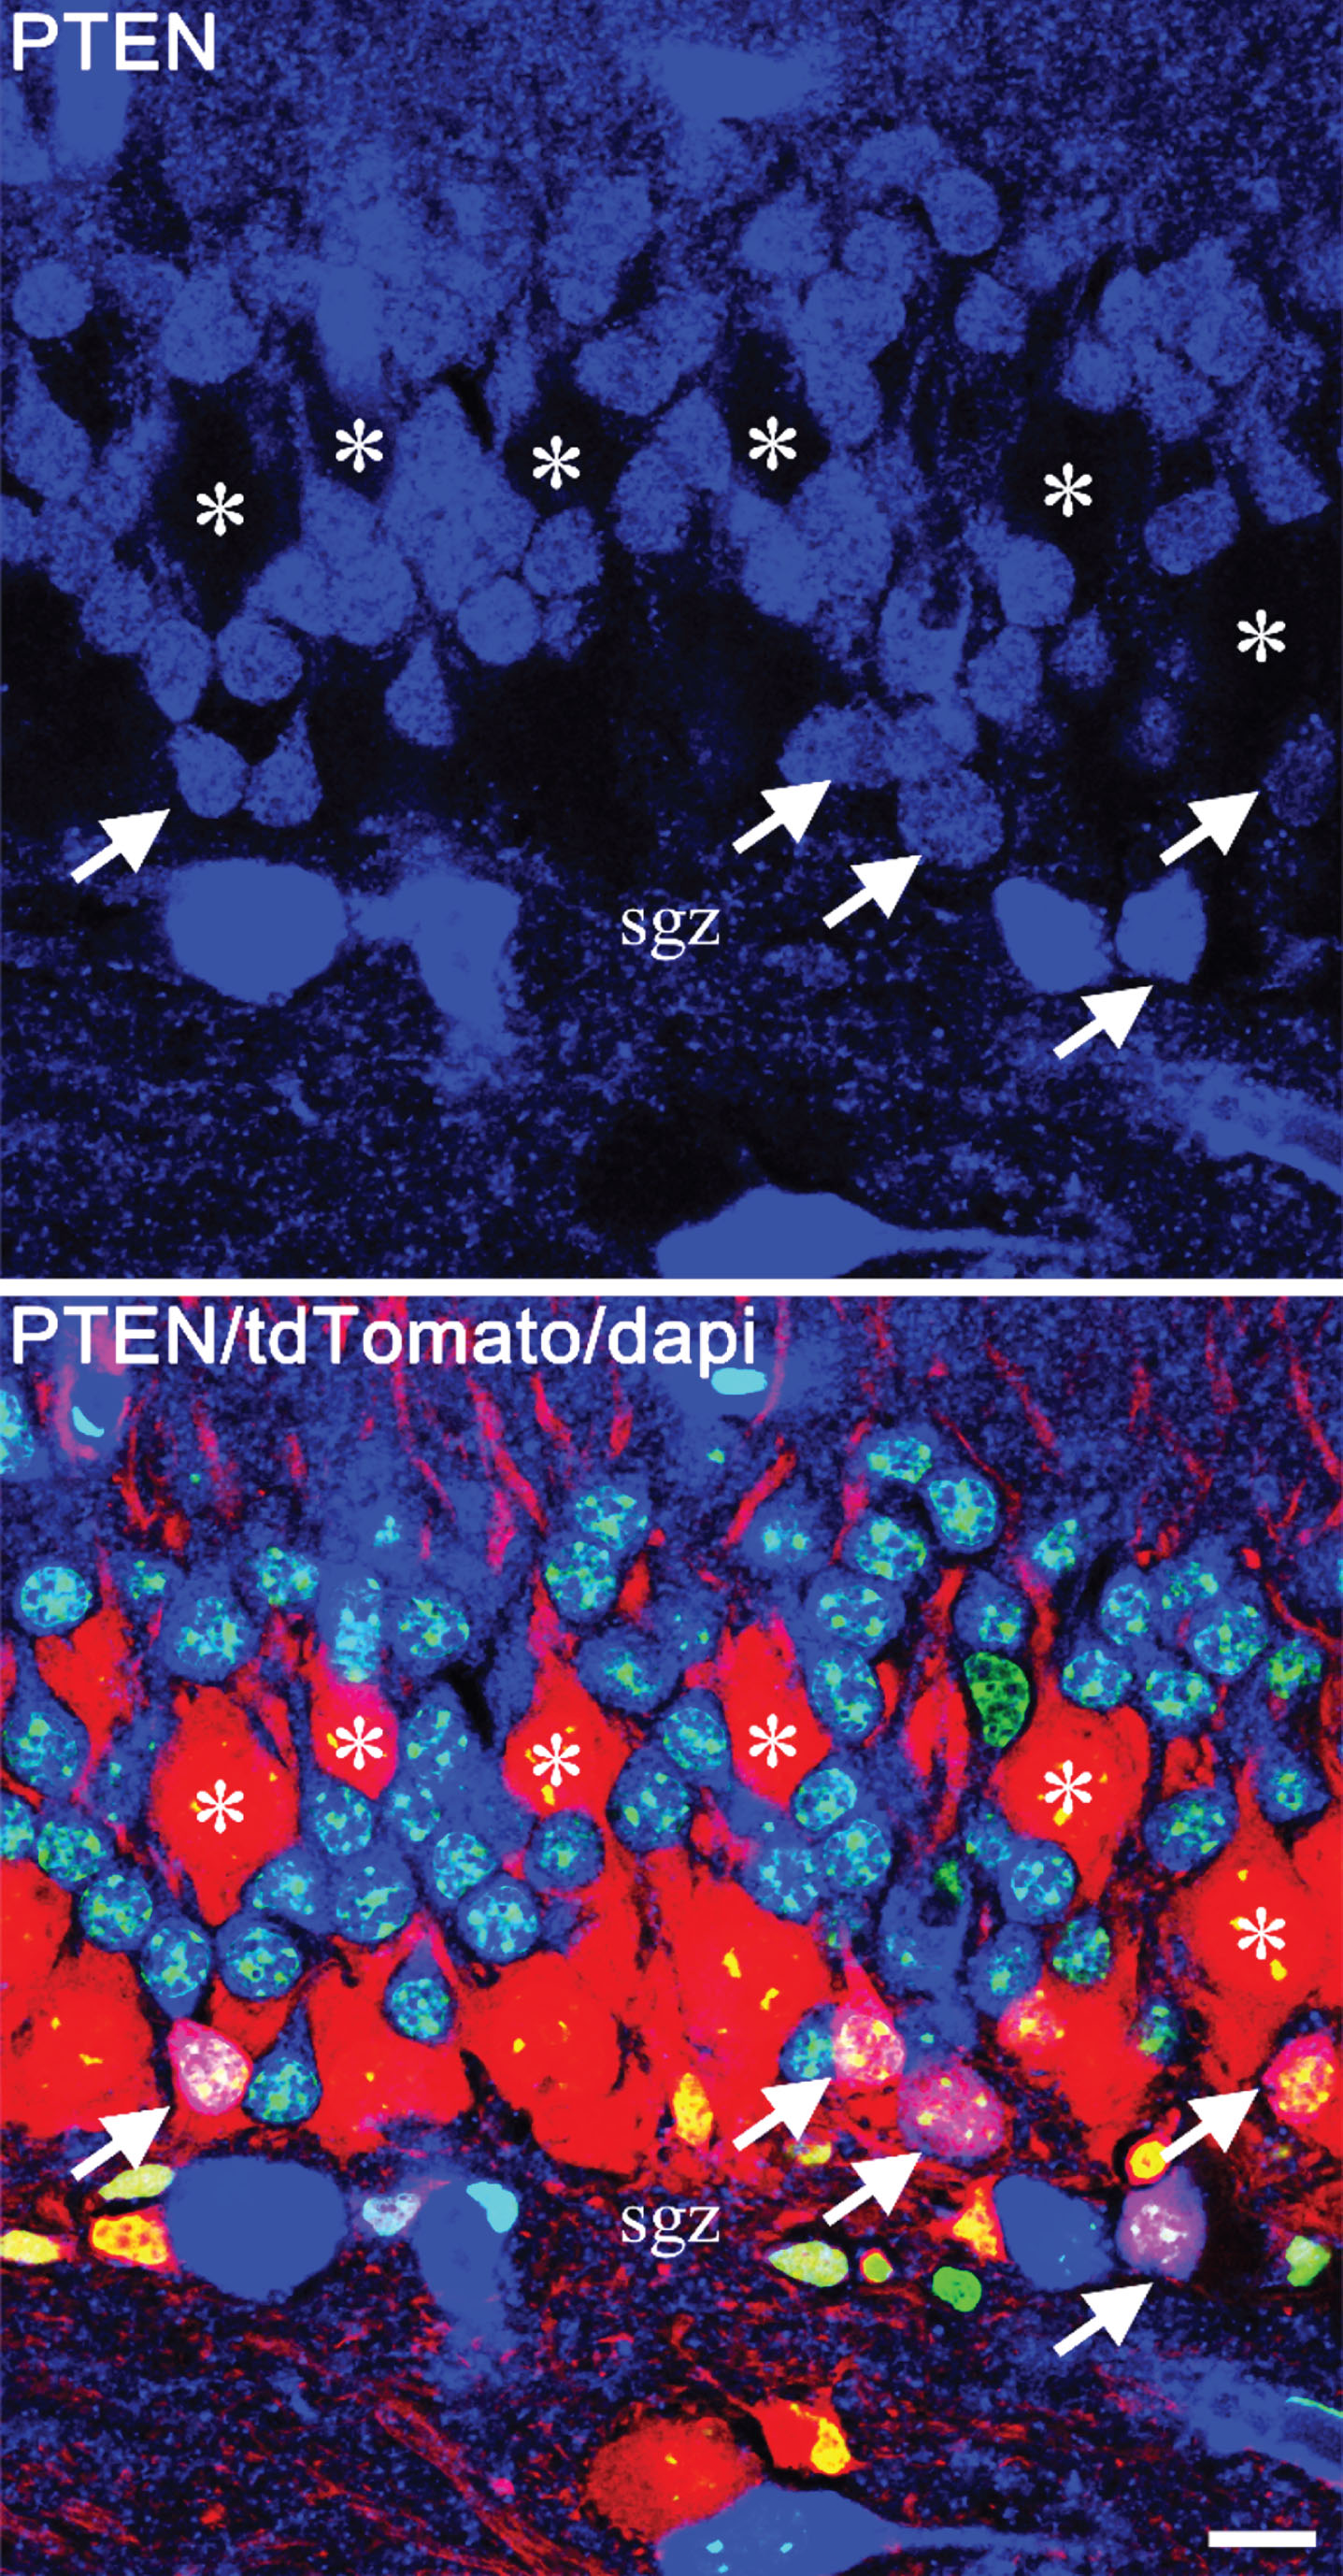 Confocal images showing mosaic deletion of PTEN from newborn hippocampal granule cells in a Gli1-CreERT2, PTENfl/fl, tdTomato reporter mouse. PTEN is shown in blue, tdTomato in red and dapi in green. The top panel shows PTEN alone, and the lower panel shows the merged image. PTEN-expressing newborn cells (arrows) are located in the inner third of the granule cell body layer, close to the subgranular zone (sgz). The much larger PTEN KO granule cells (asterisks), on the other hand, are distributed through the cell body layer, with some migrating close to the molecular layer border. Scale bar = 10μm.